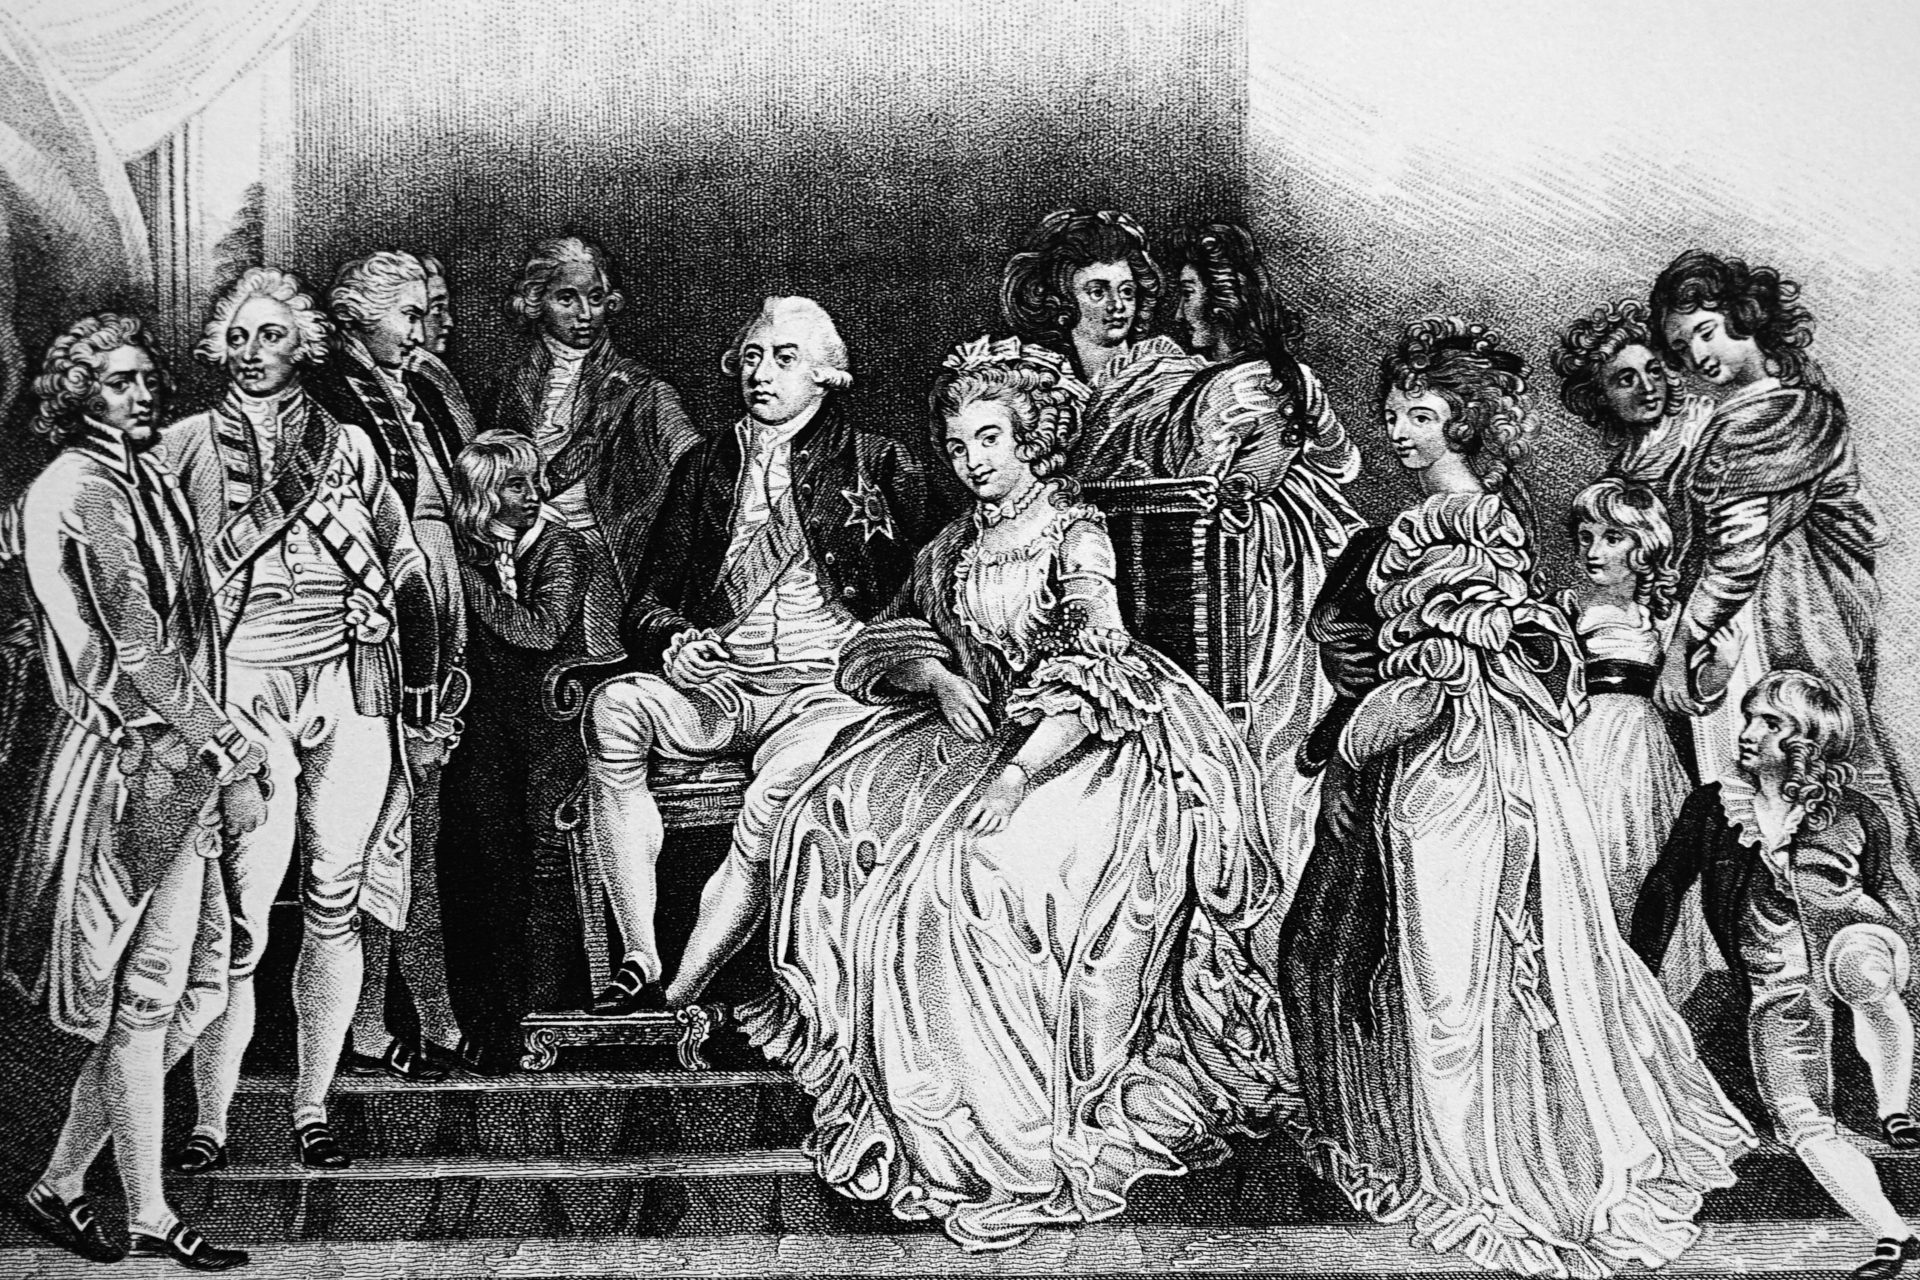 <p>The wedding between King George III and Princess Charlotte was a resounding success. According to the accounts of the time, strong ties built between them over time, and the king and queen of England lived a solid and beautiful love story.</p>